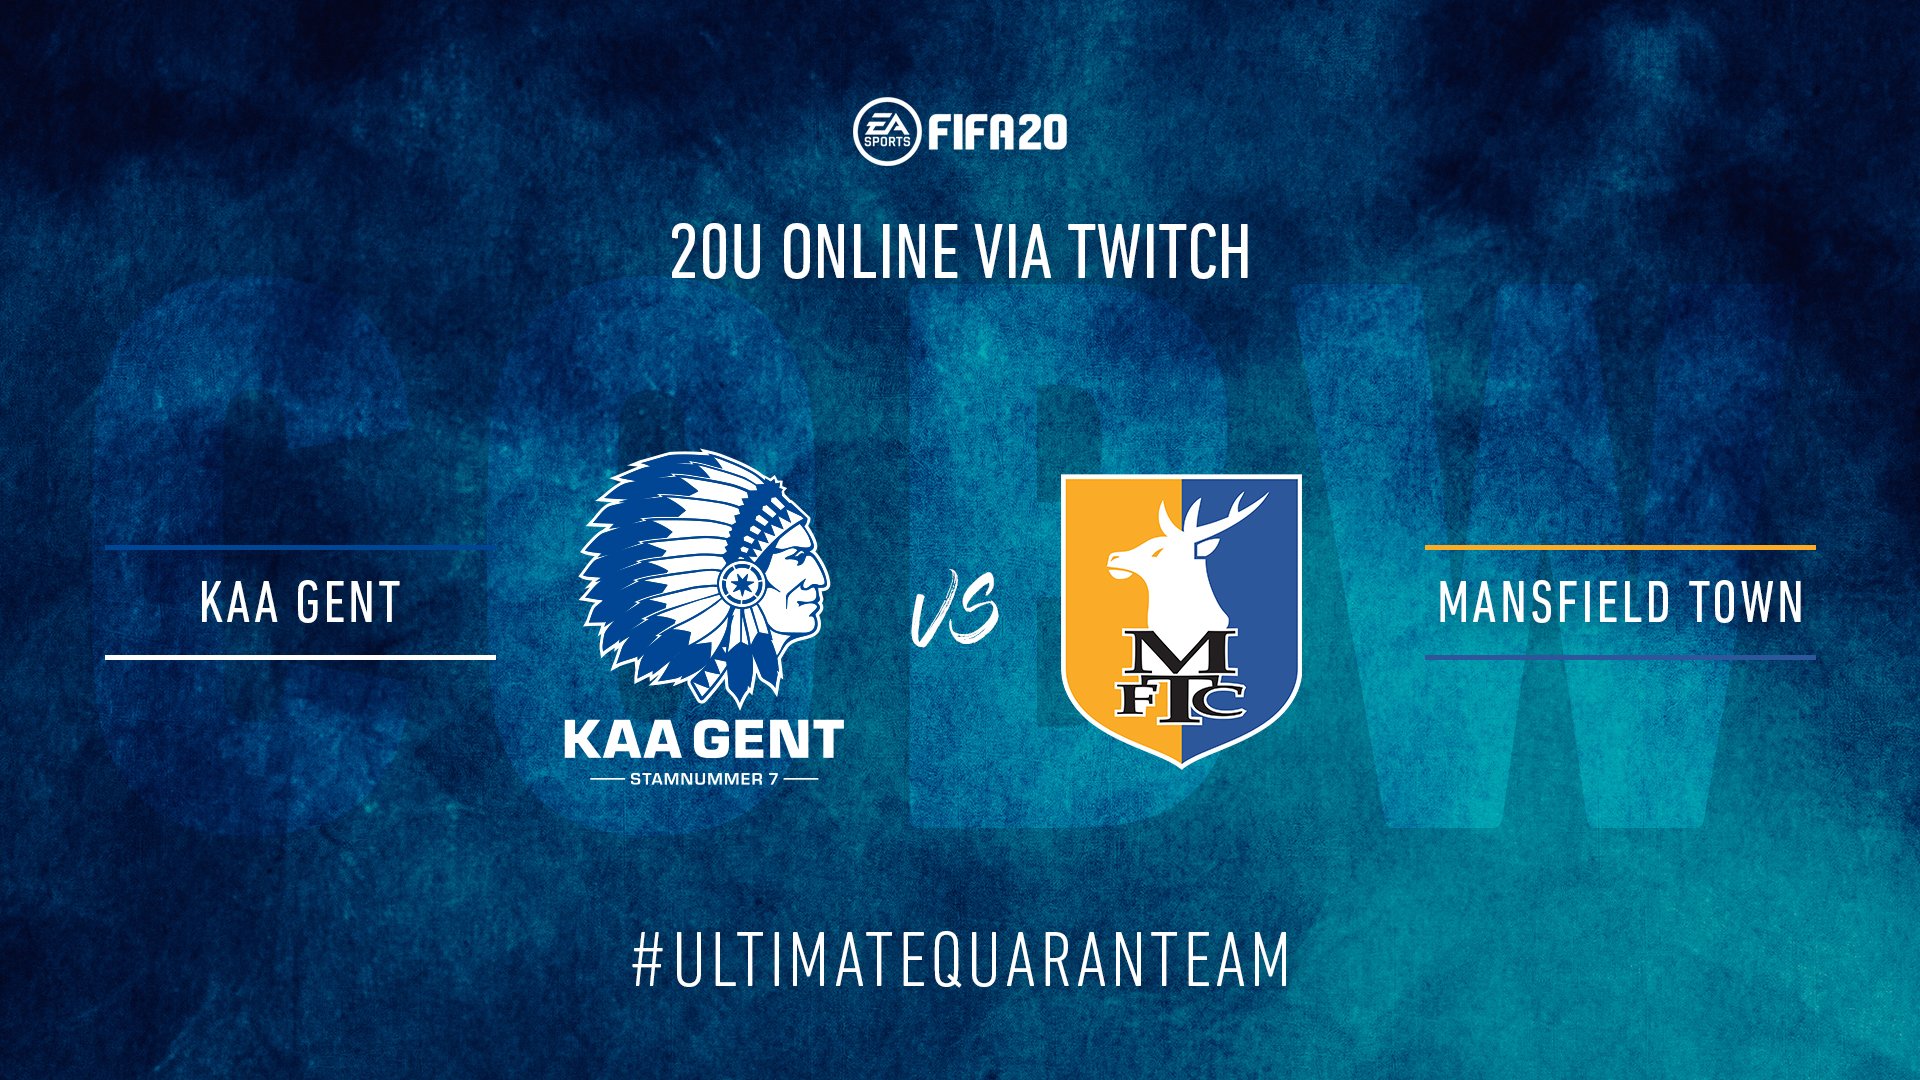 Kaa Gent 1 3 For Mansfieldtownfc Things Are Going Sideways In The Ghelamco Arena T Co 50enin7kkz Gntman Fifaquaranteam T Co httbaqot